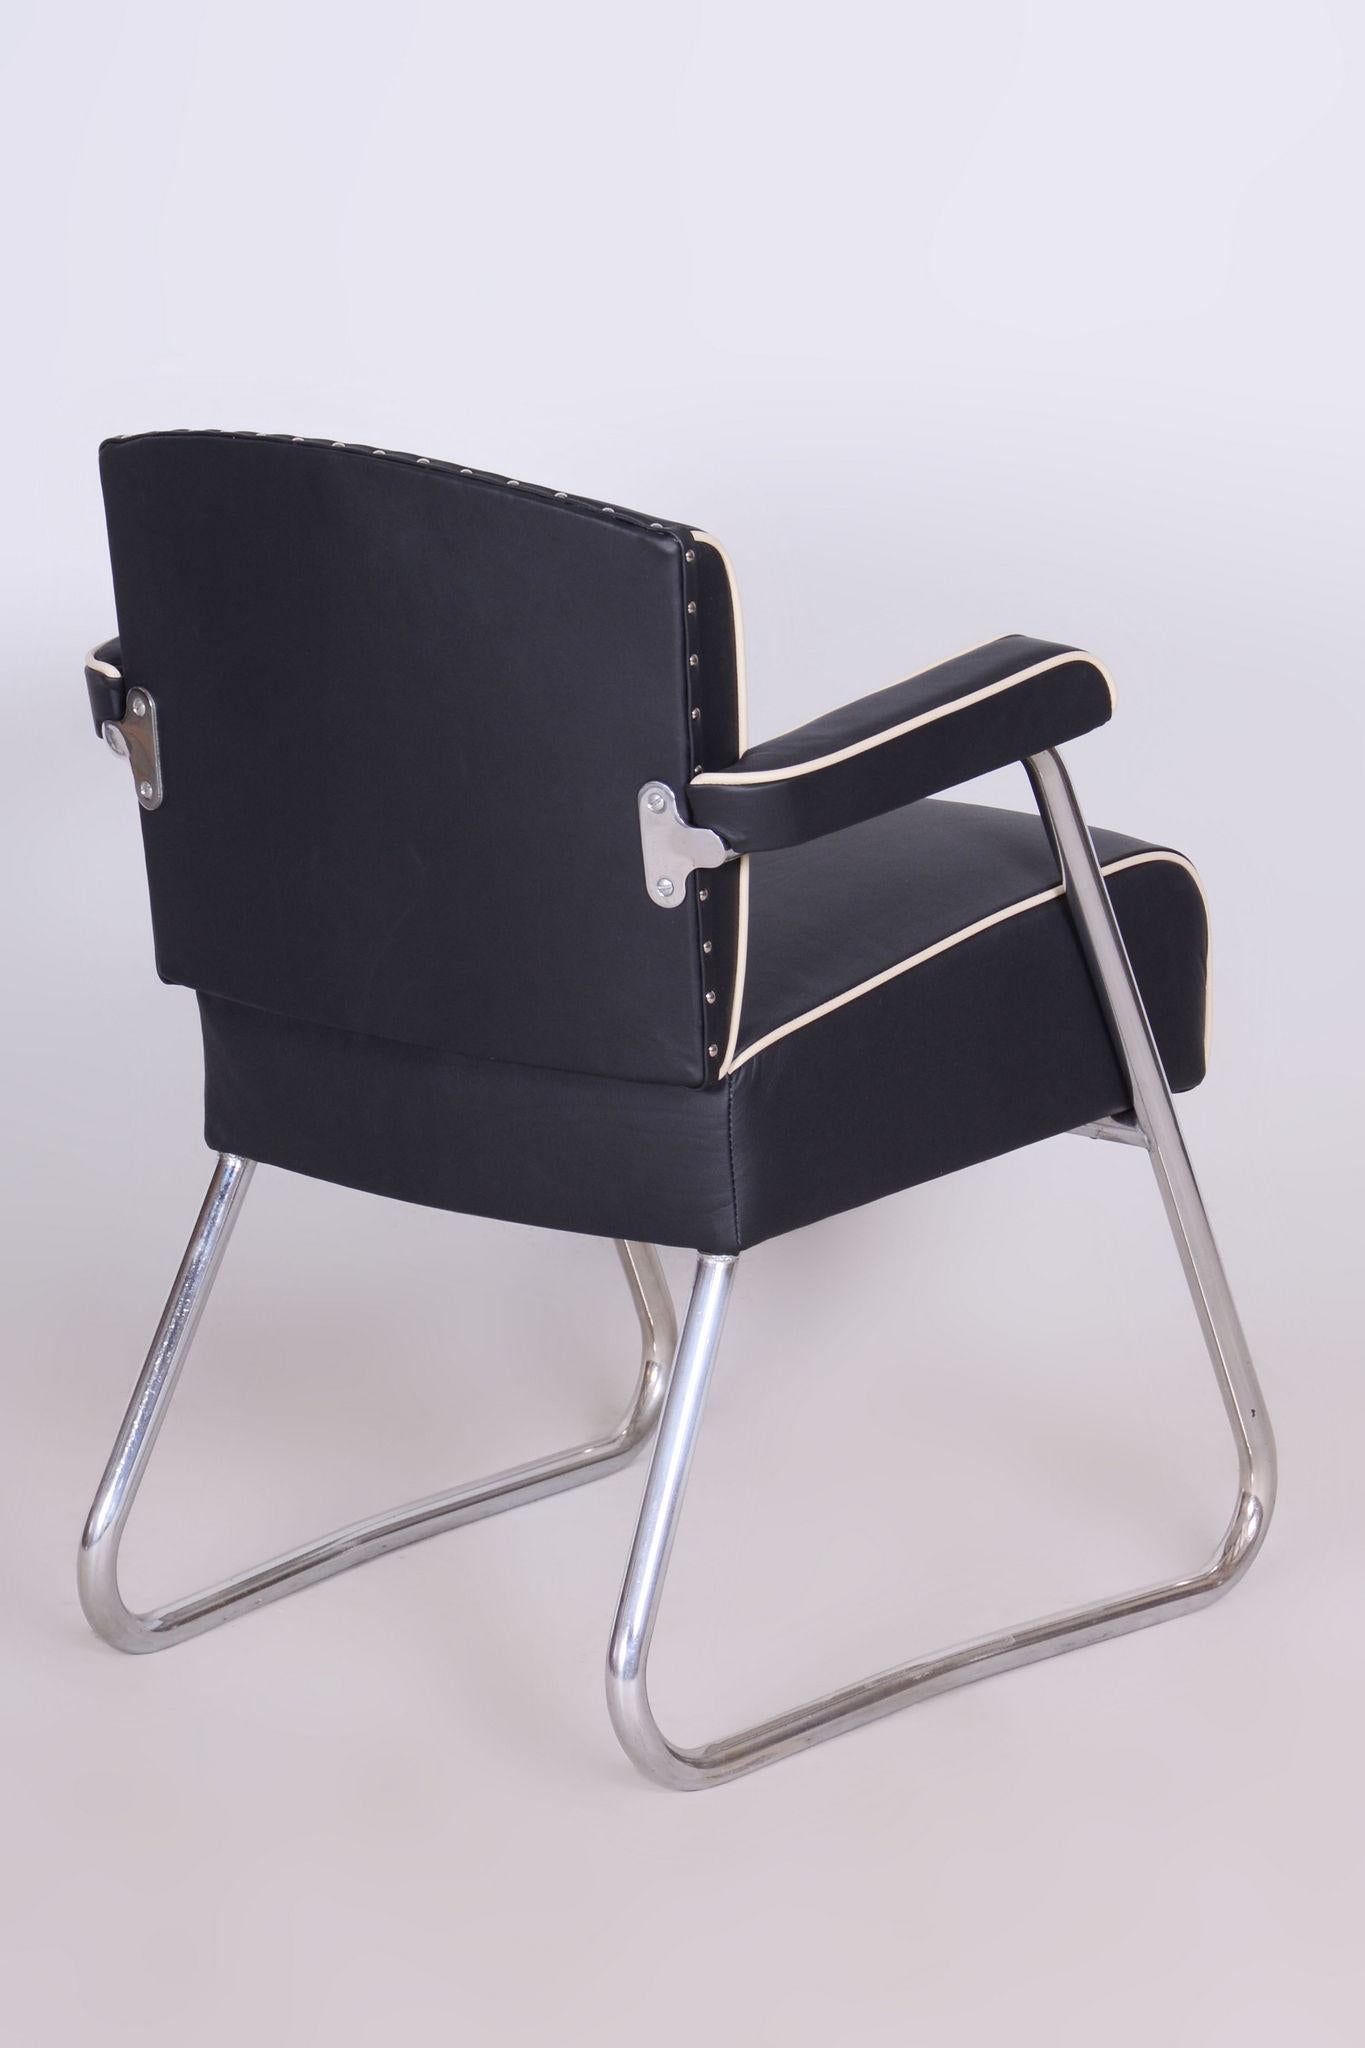 Steel Restored Black Bauhaus Armchair, Mauser, Rohde, Chrome, Leather, Germany, 1930s For Sale